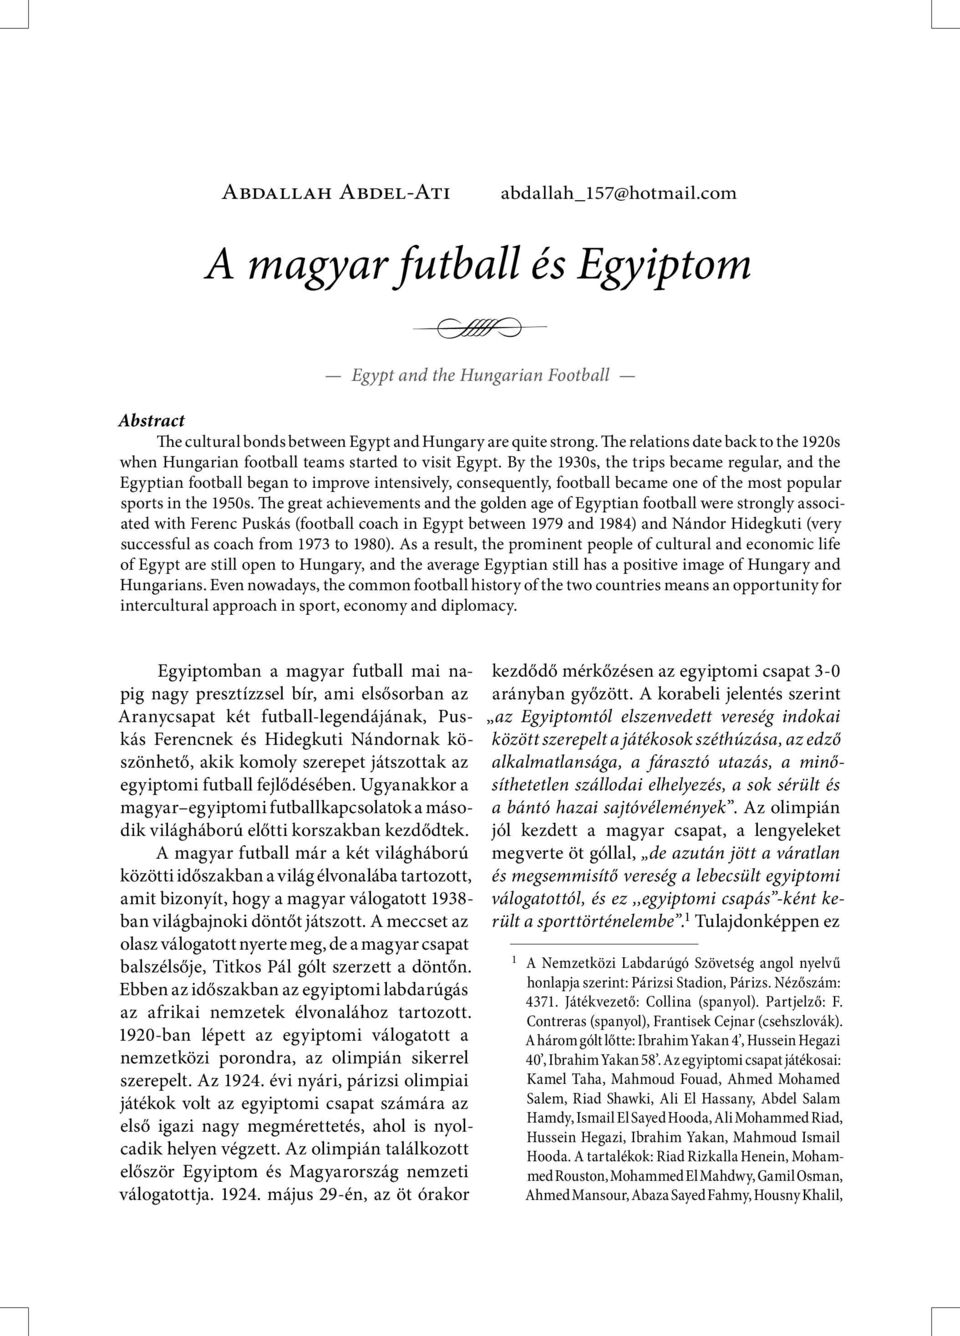 By the 1930s, the trips became regular, and the Egyptian football began to improve intensively, consequently, football became one of the most popular sports in the 1950s.